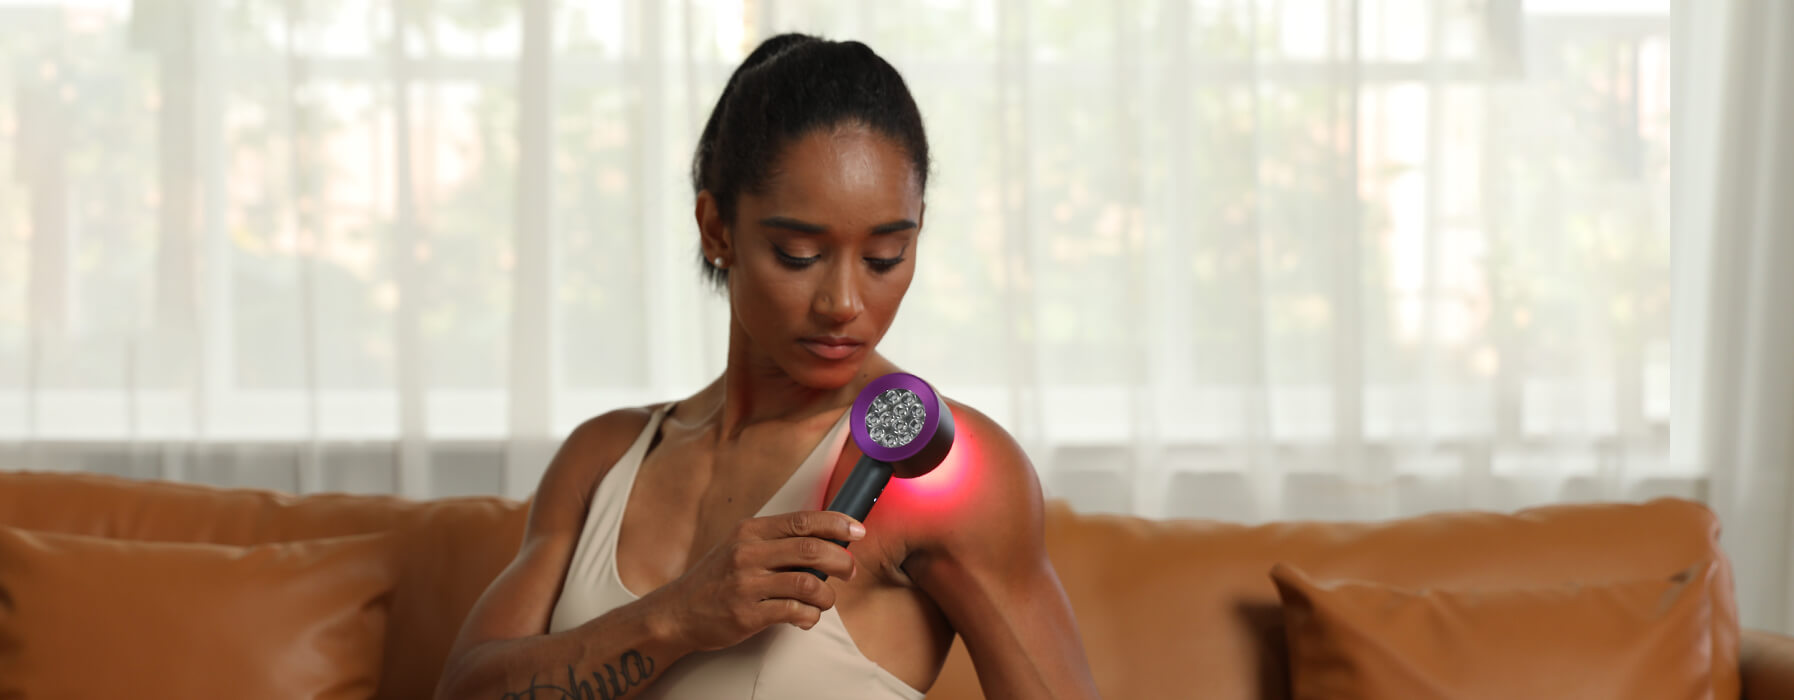 Scienlodic Red Light Therapy Wand